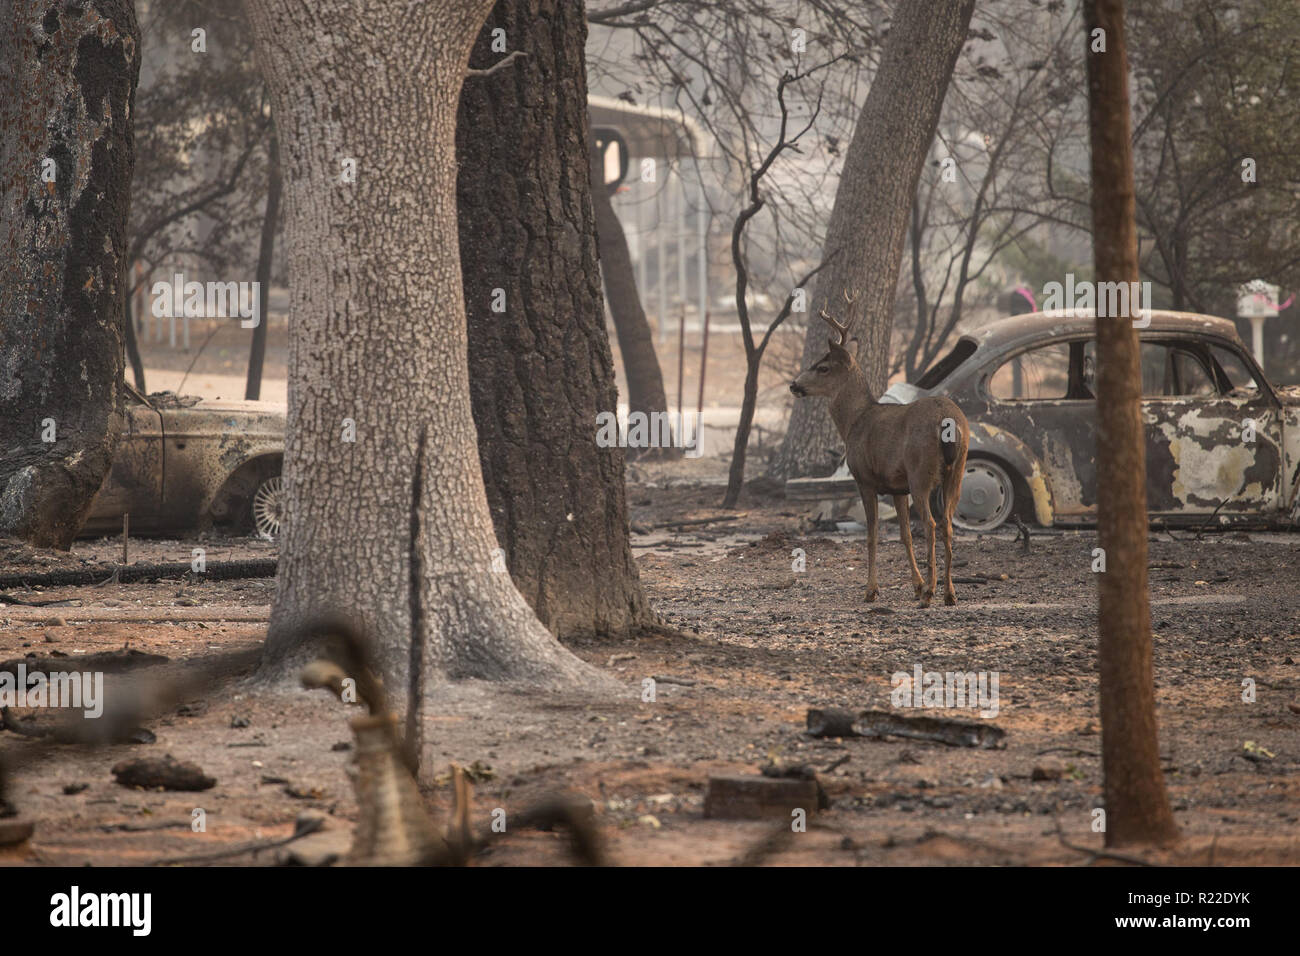 Paradise, California, USA. 15th Nov, 2018. A buck wanders in a burned out neighborhood days after the Camp Fire ripped through Paradise. The deer passed a burnt VW bug automobile.The death toll has risen to 56 in Northern California's deadly record Camp Fire. Credit: Joel Angel Juarez/ZUMA Wire/Alamy Live News Stock Photo